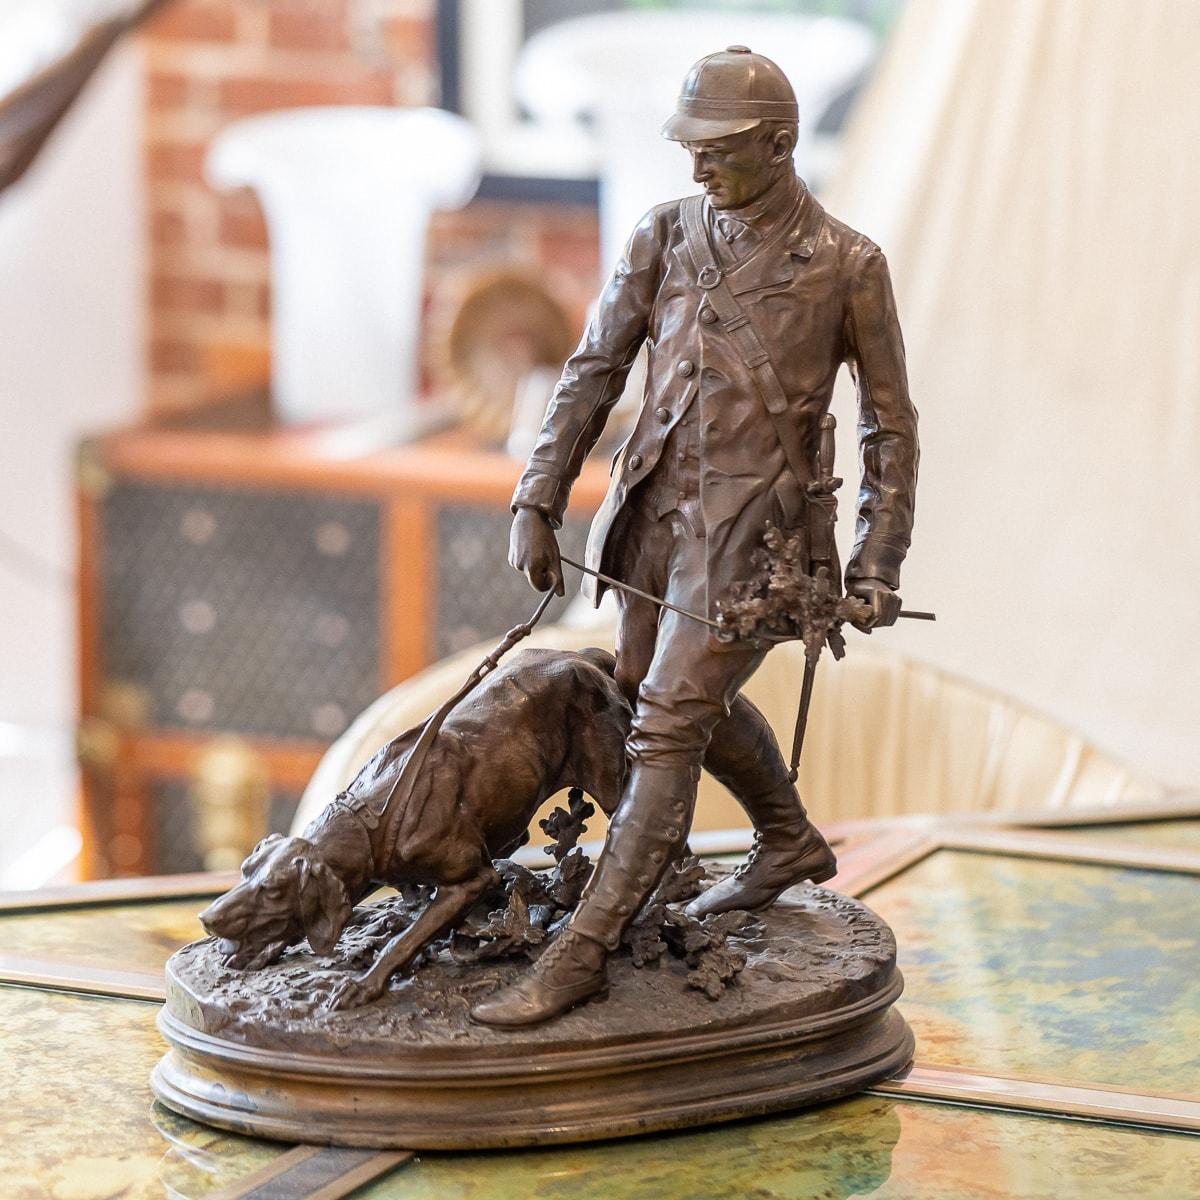 Antique 19th Century French patinated bronze by Pierre Jules Méne (French, 1810-1871), of 'Valet de Limier (The Bloodhound Handler)', the huntsman led by his dog on oval naturalistic base, signed and dated P.J. MÊNE 1879, the proper right side of